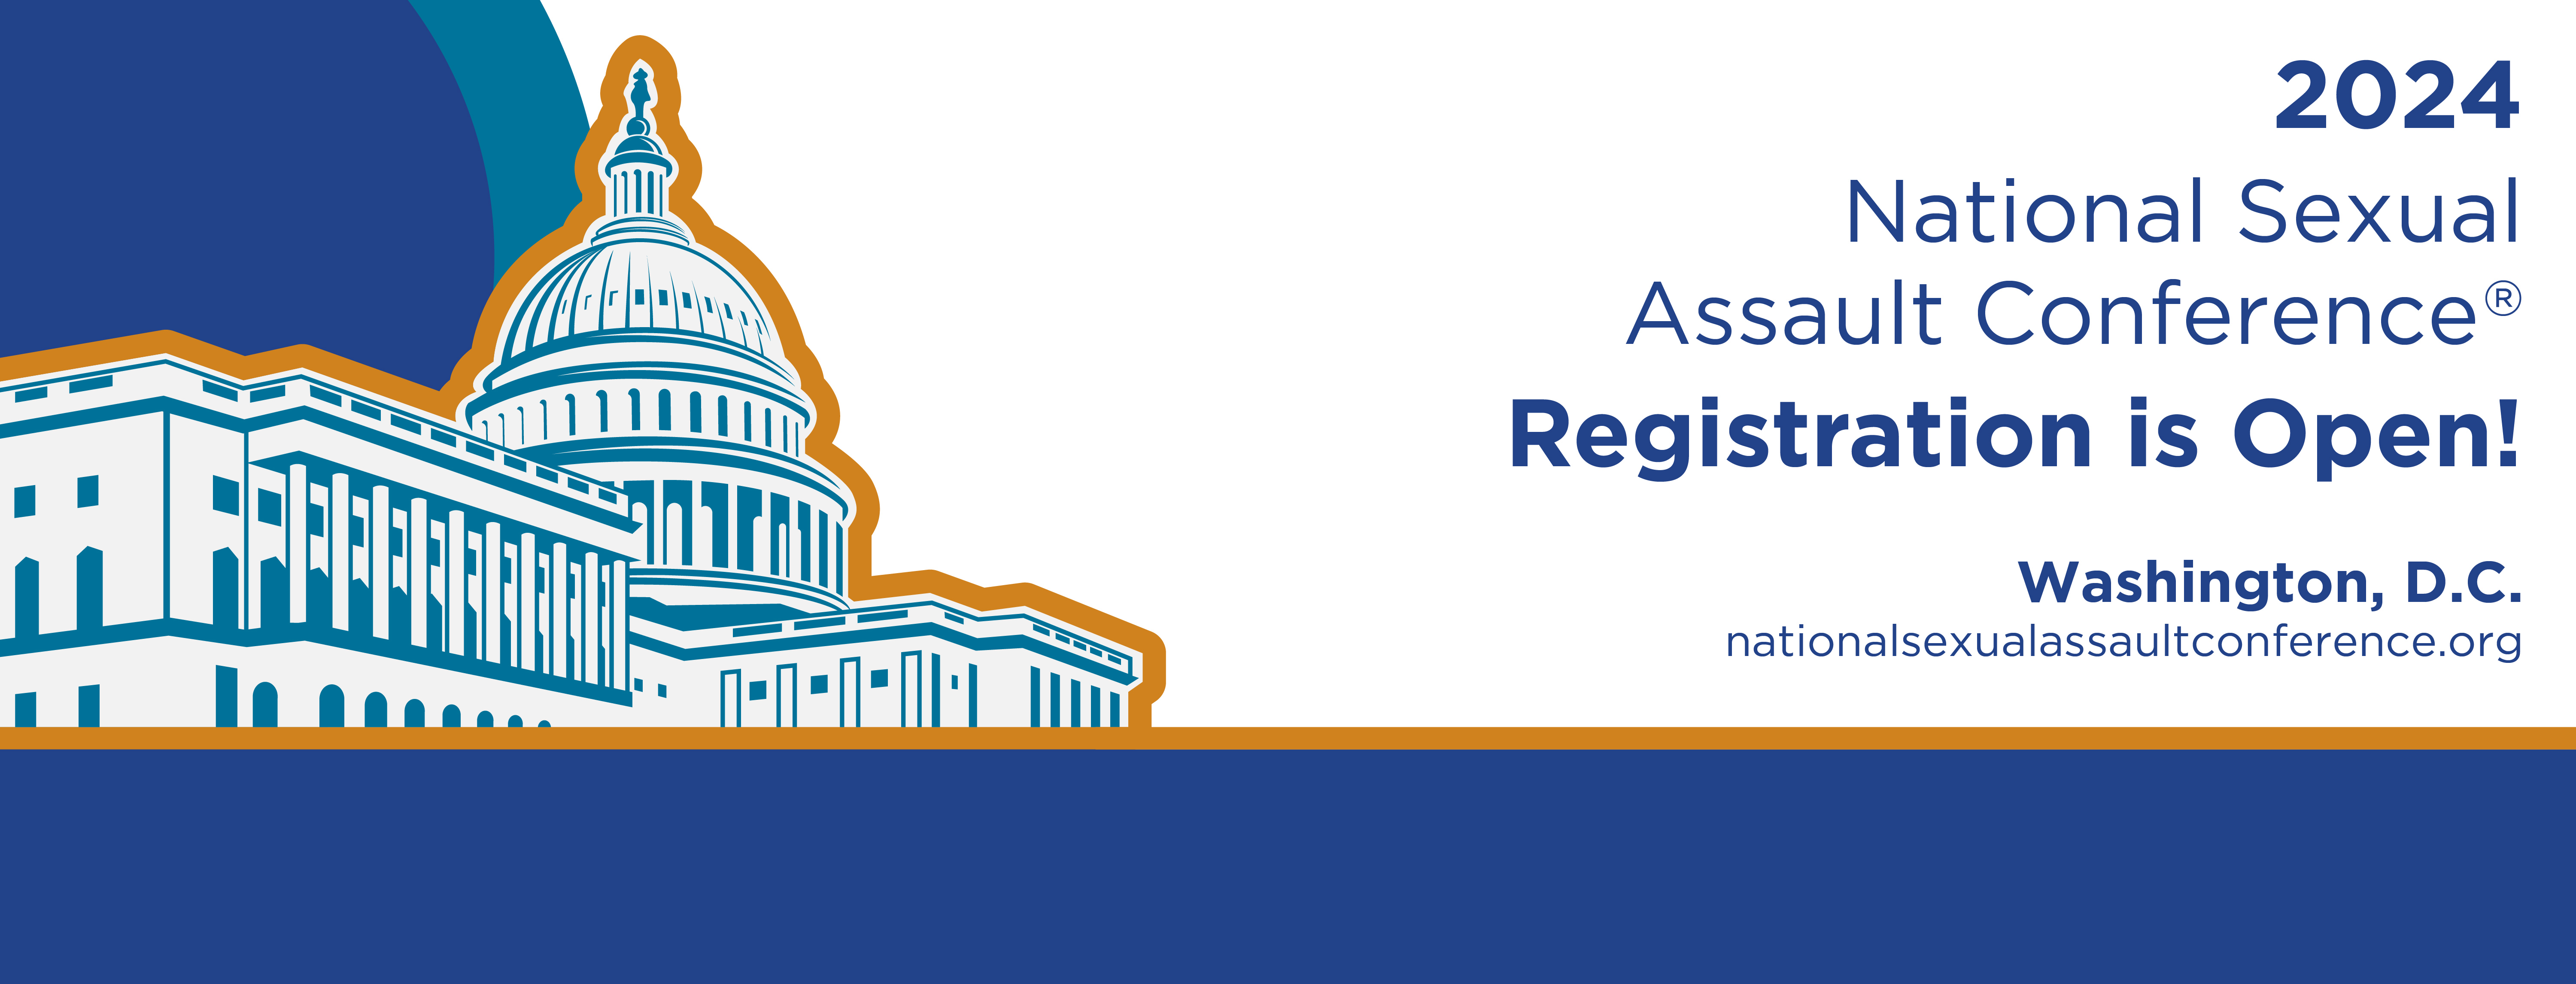 NSAC 2024 Registration Now Open